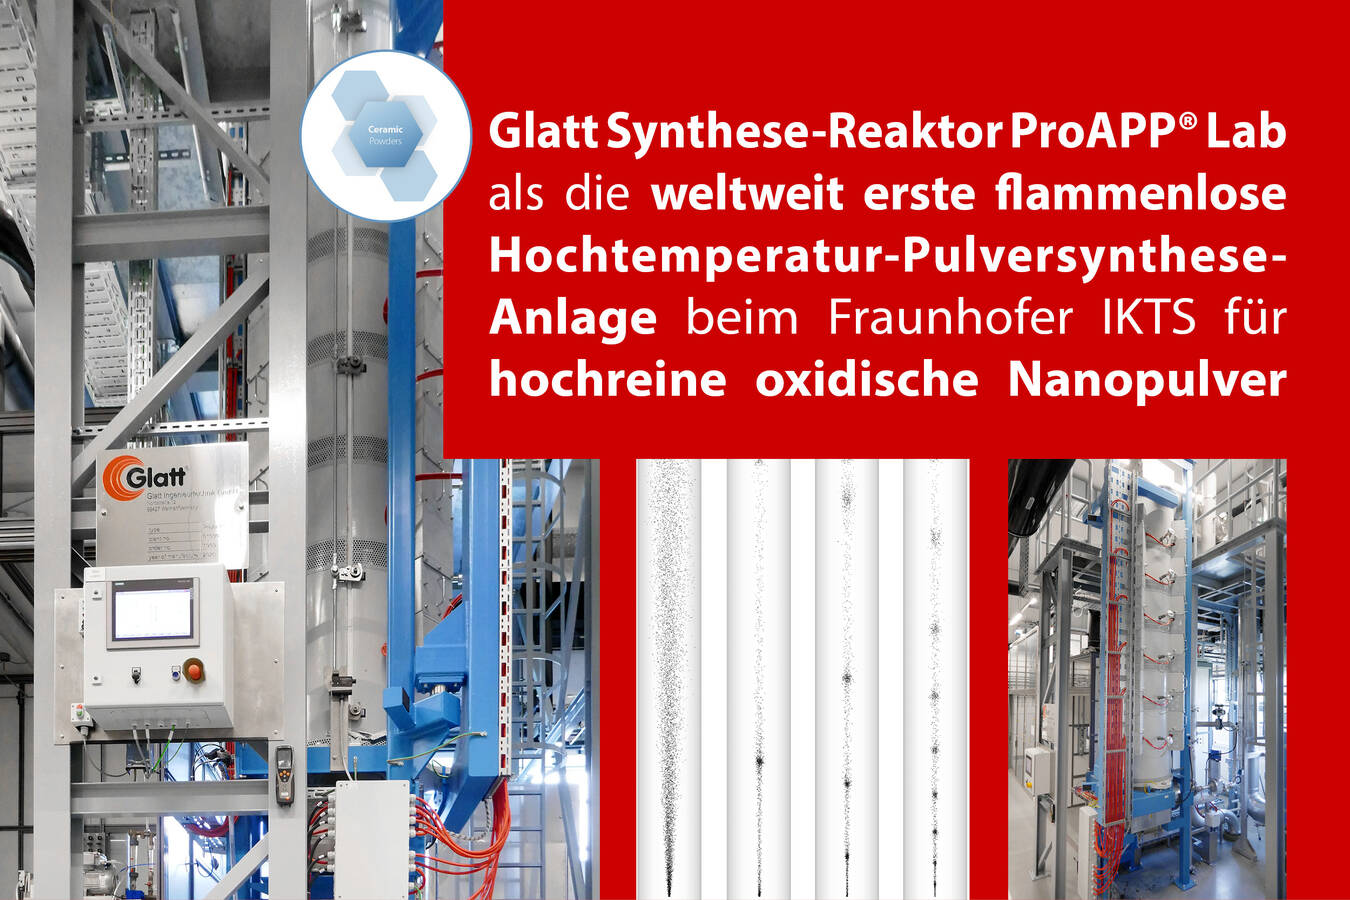 World’s first flameless high-temperature powder synthesis plant The German Fraunhofer Institute for Ceramic Technologies and Systems IKTS relies on technology from Glatt for high-purity, high-performance oxide materials